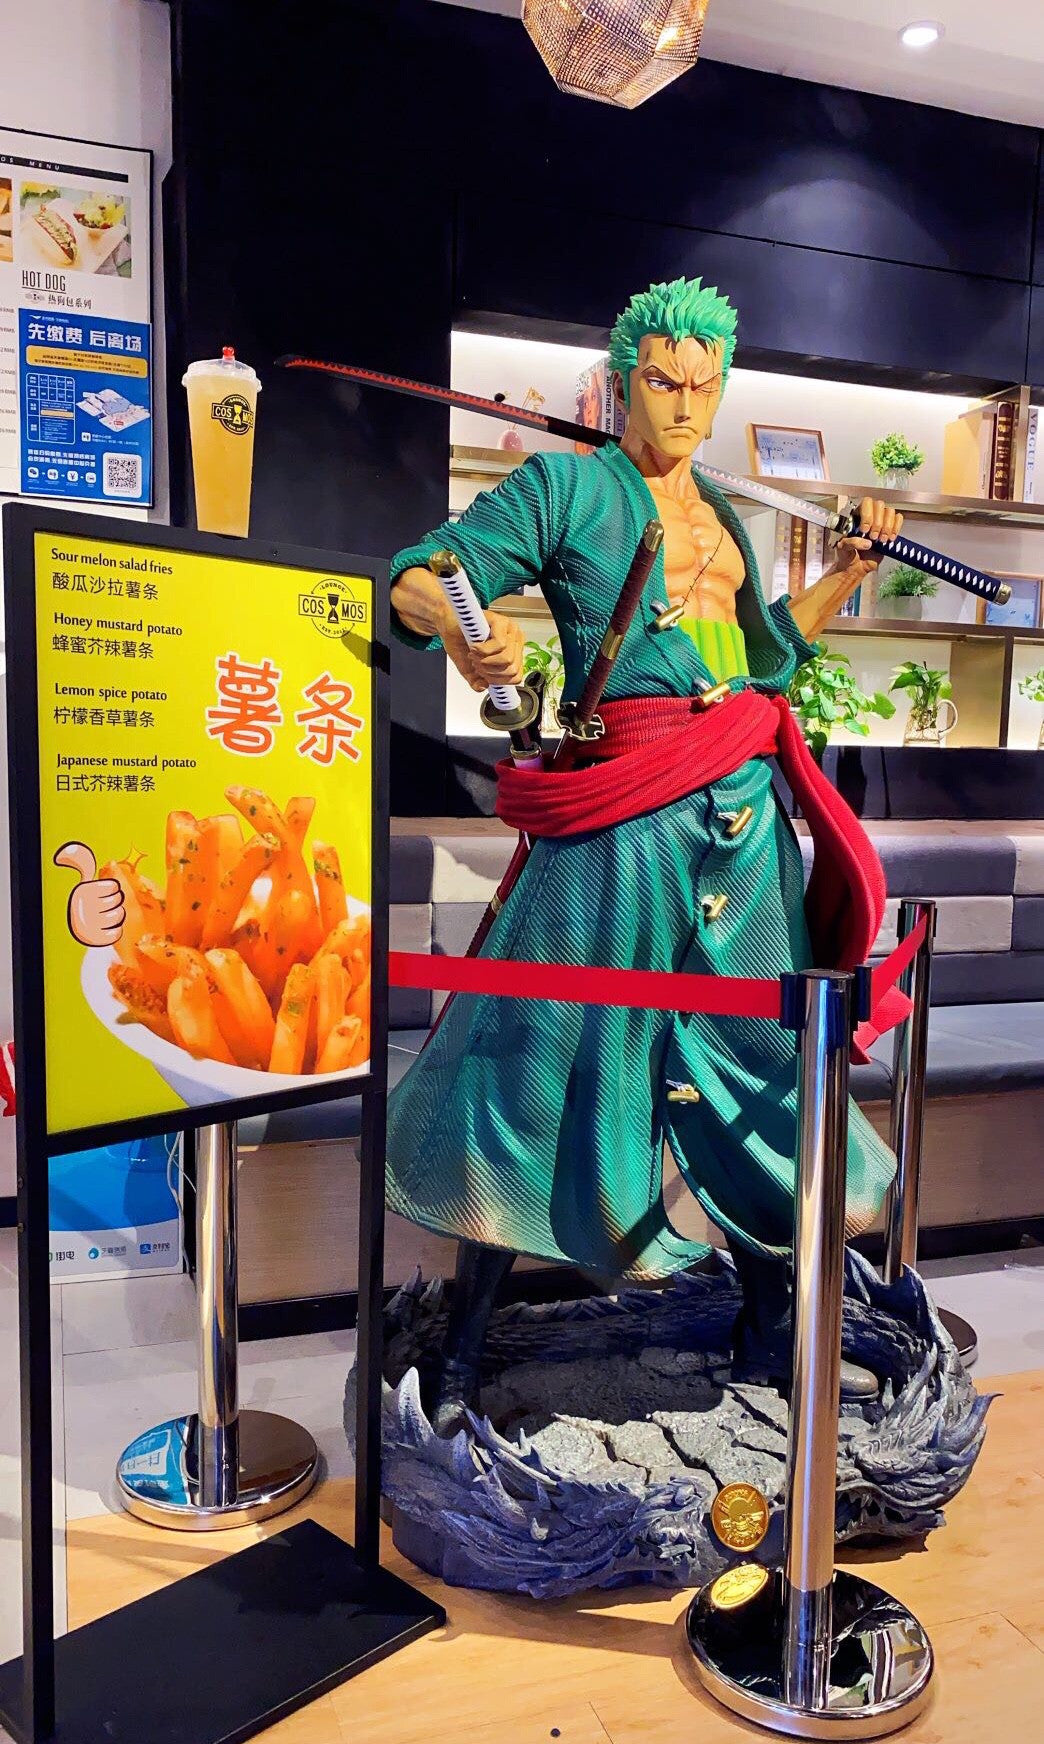 Zoro Preorder Life Size Statue مجسم زورو.